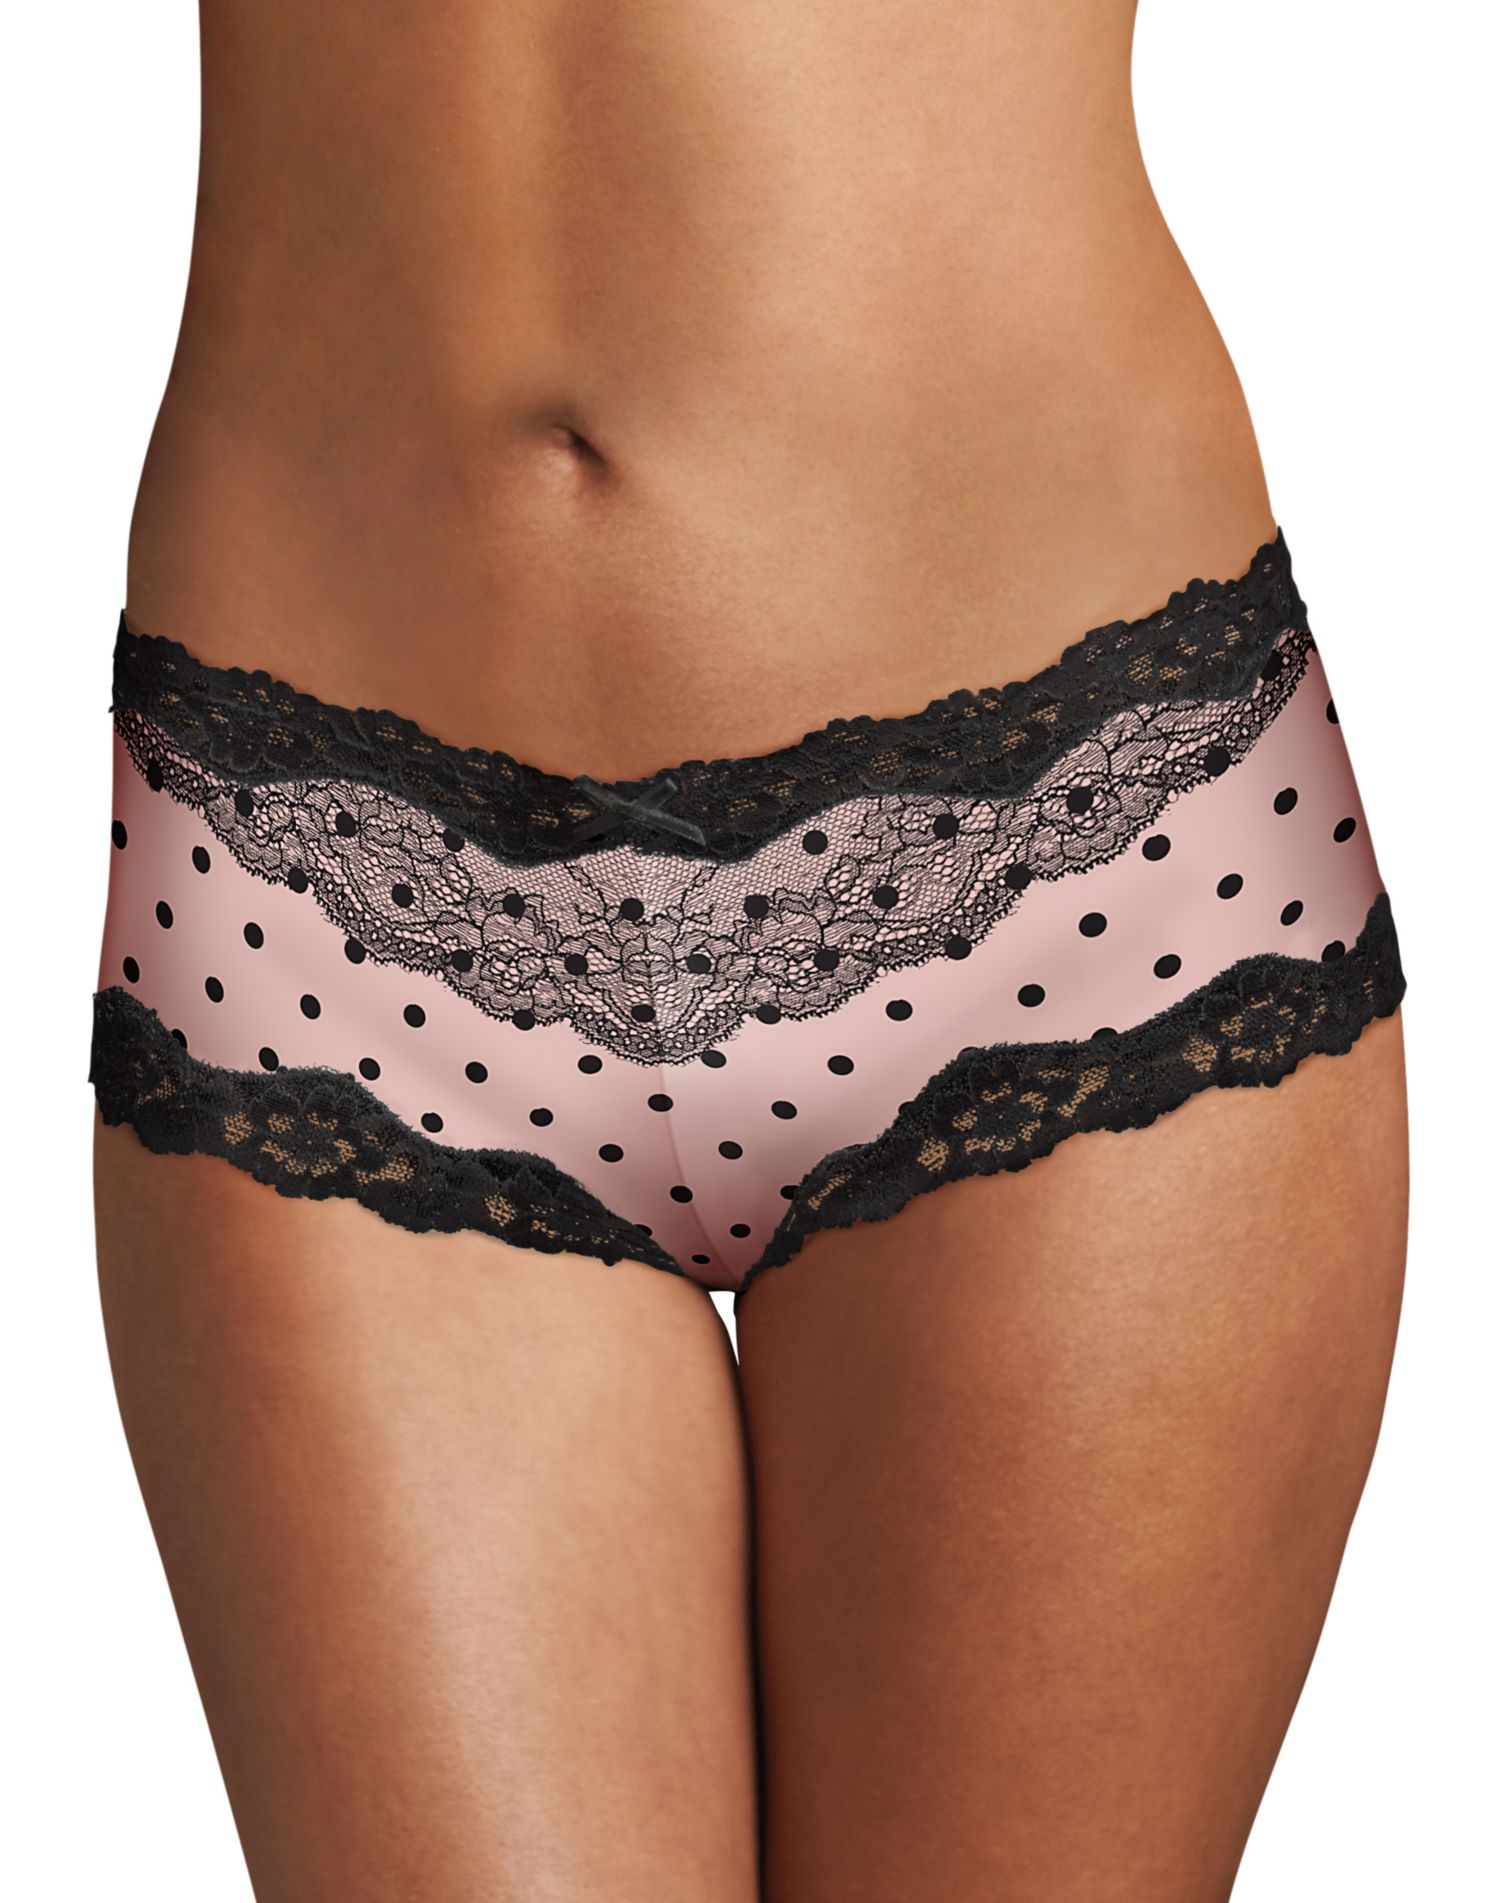  Maidenform Tanga Pack, Back Underwear, Cheeky Lace